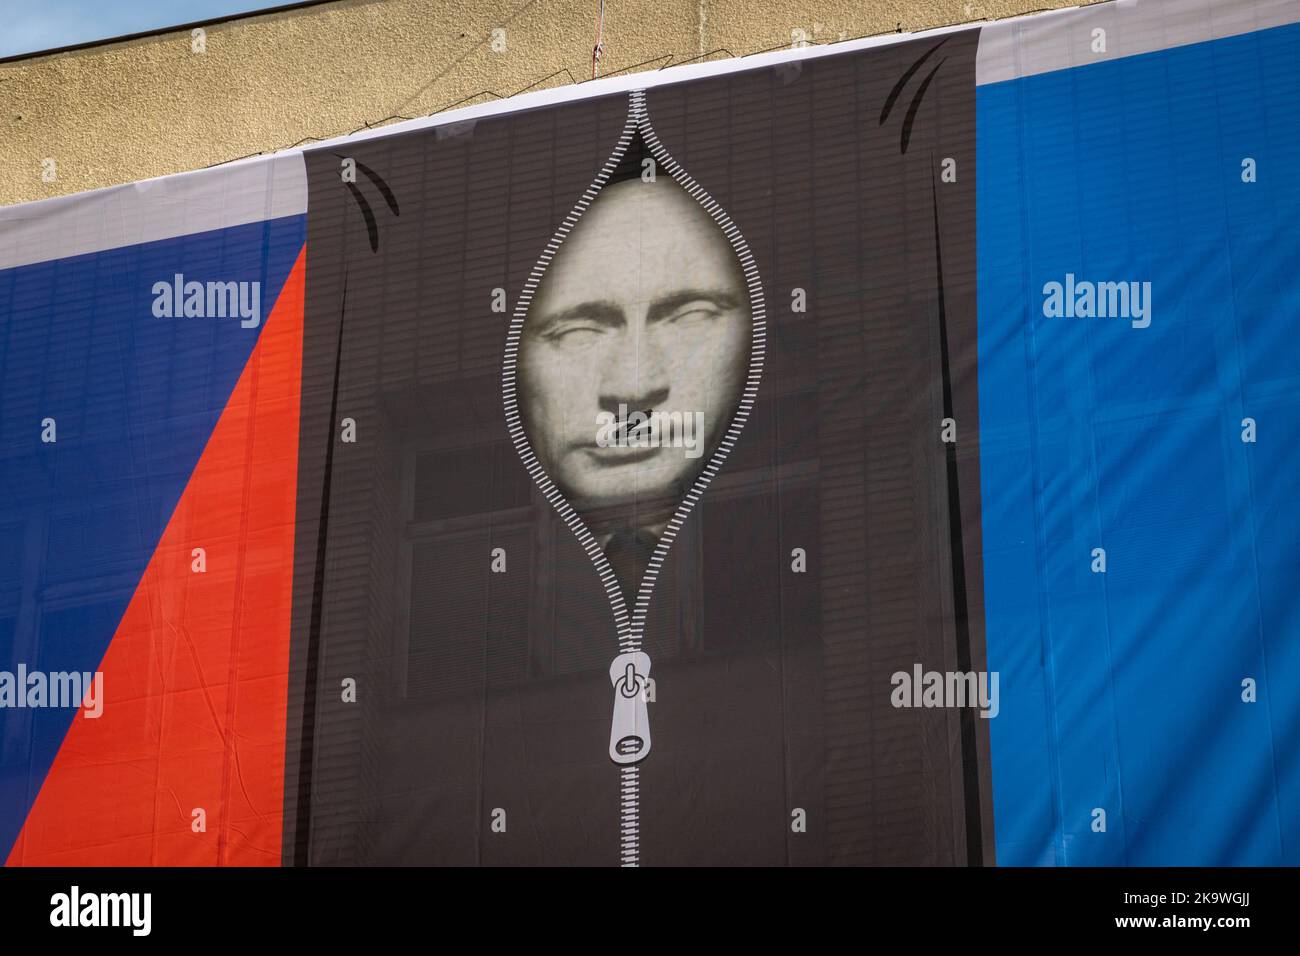 Czech Interior Ministry building with banner. Russian president, Vladimir Putin, in a black body bag between flags of the Czech Republic and Ukraine. Stock Photo